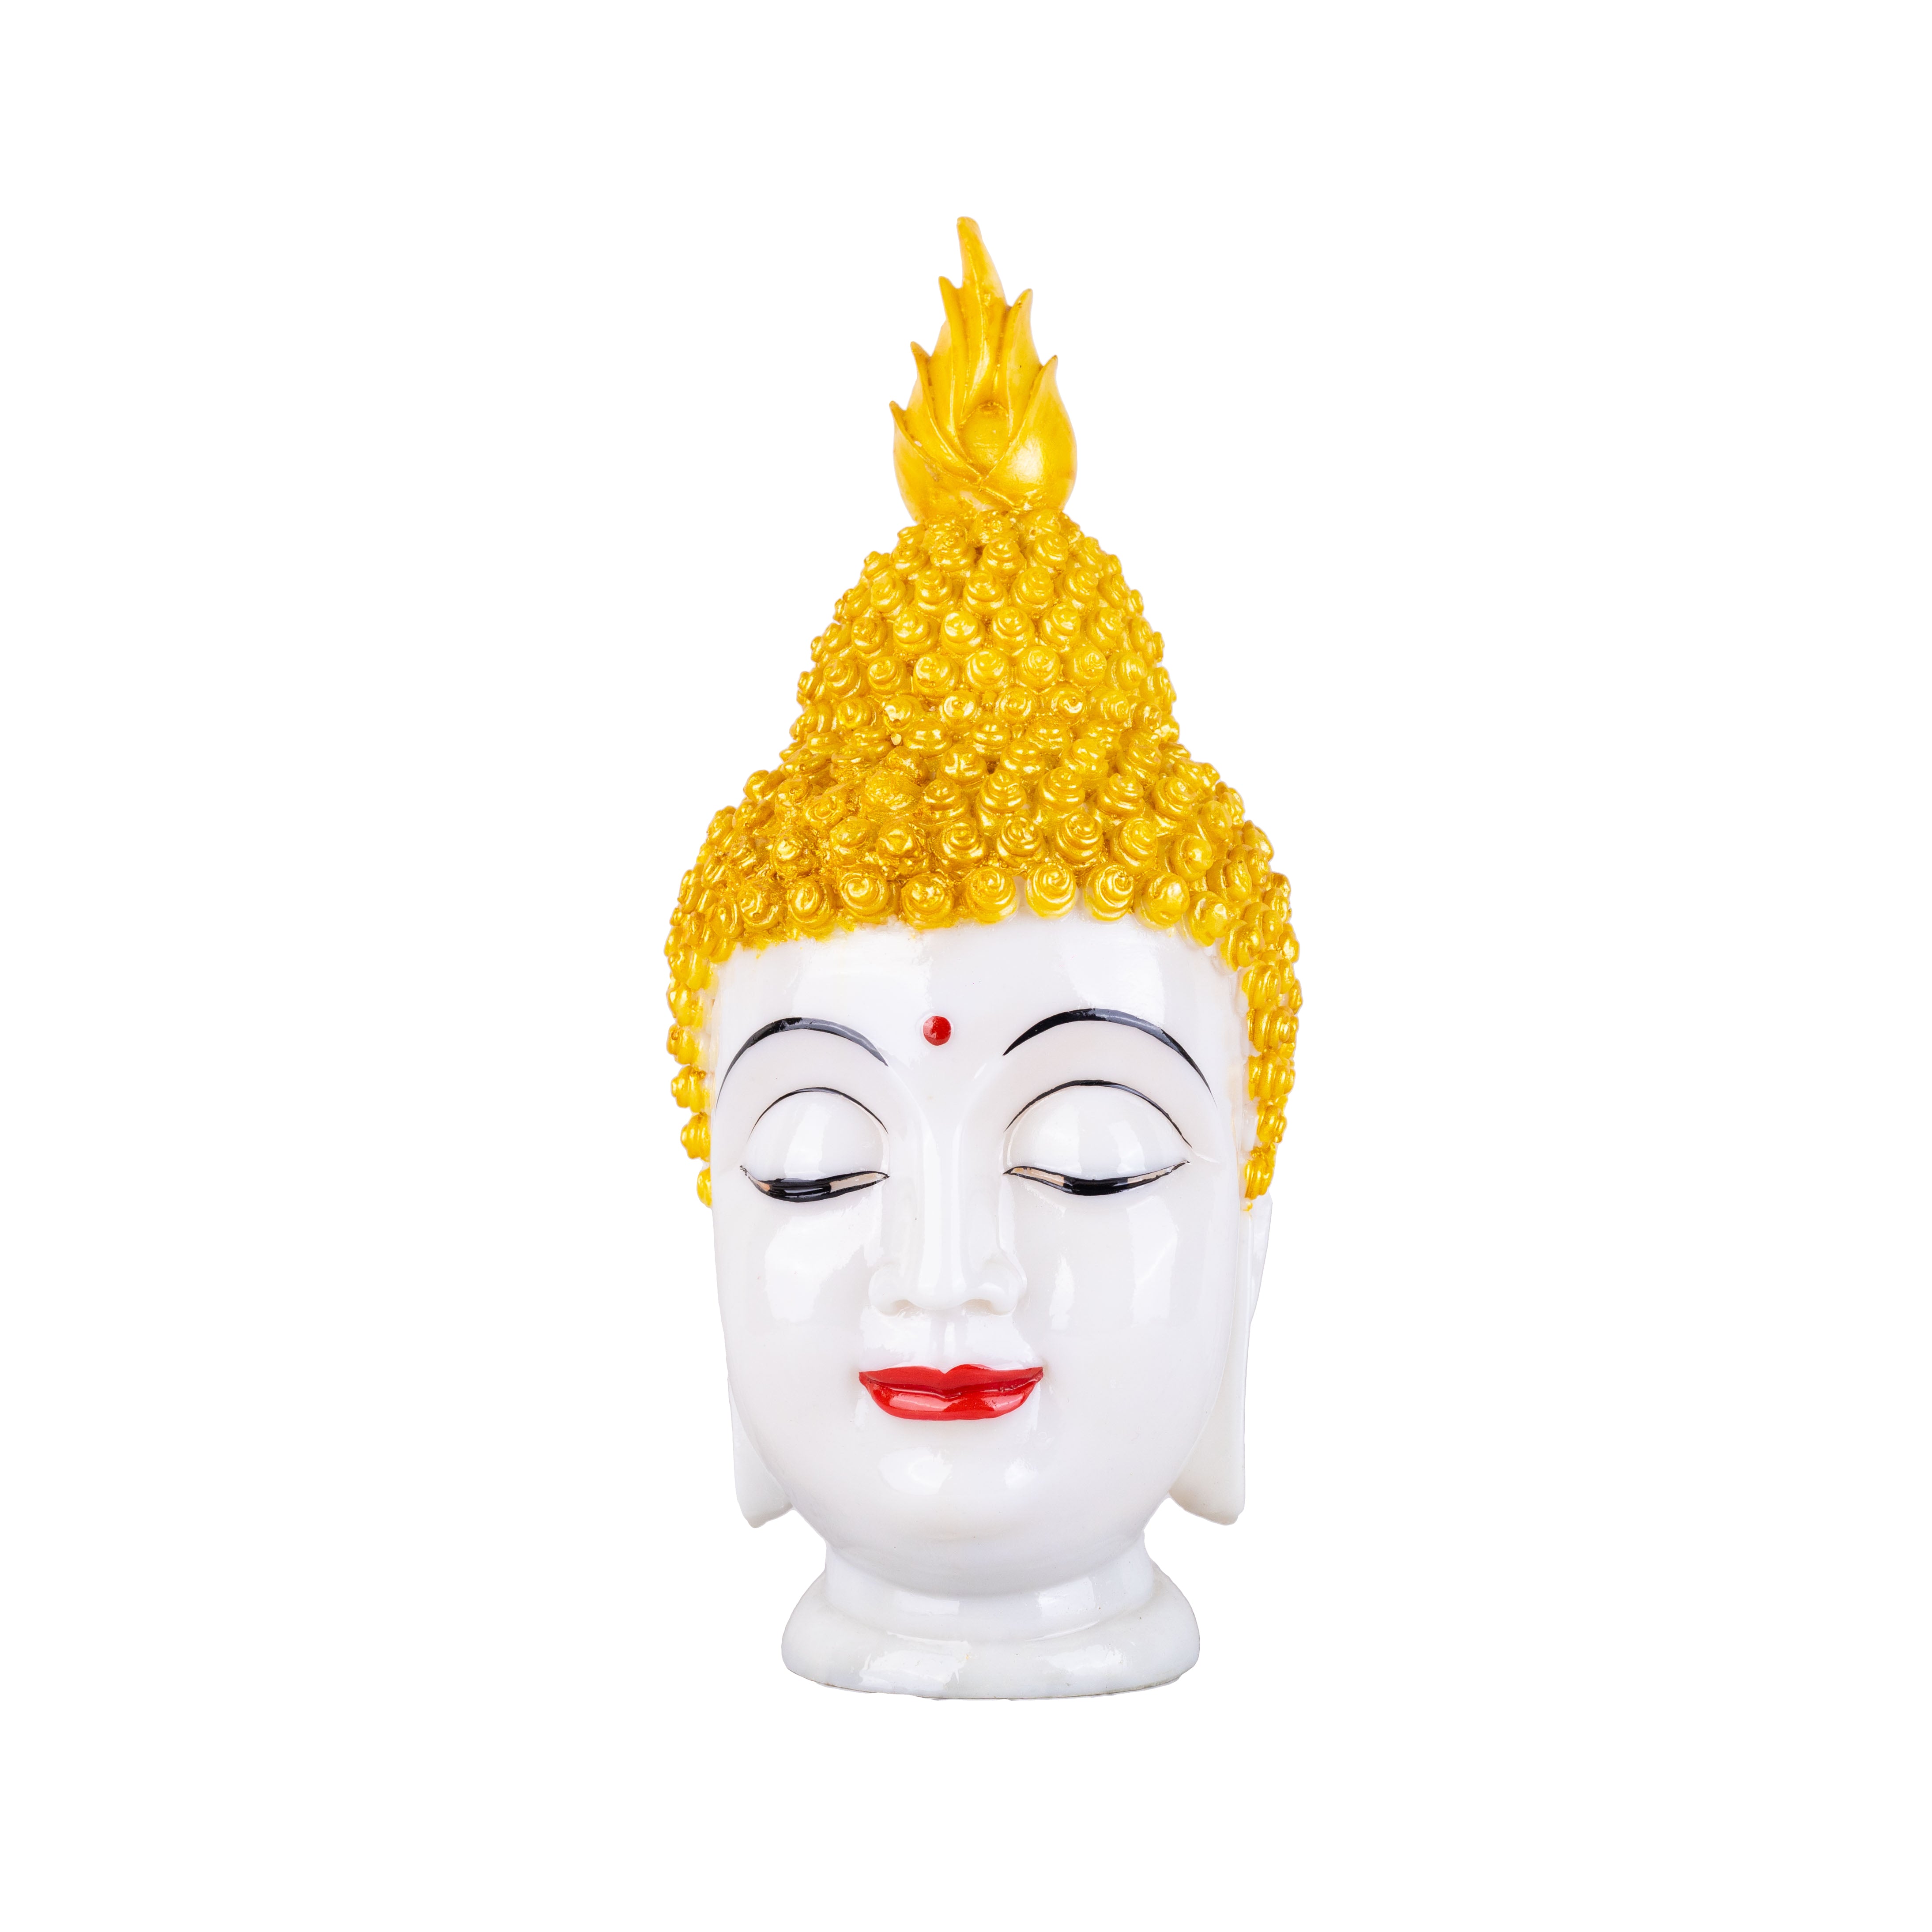 Marble dust buddha face statue for home decor - 13 inch